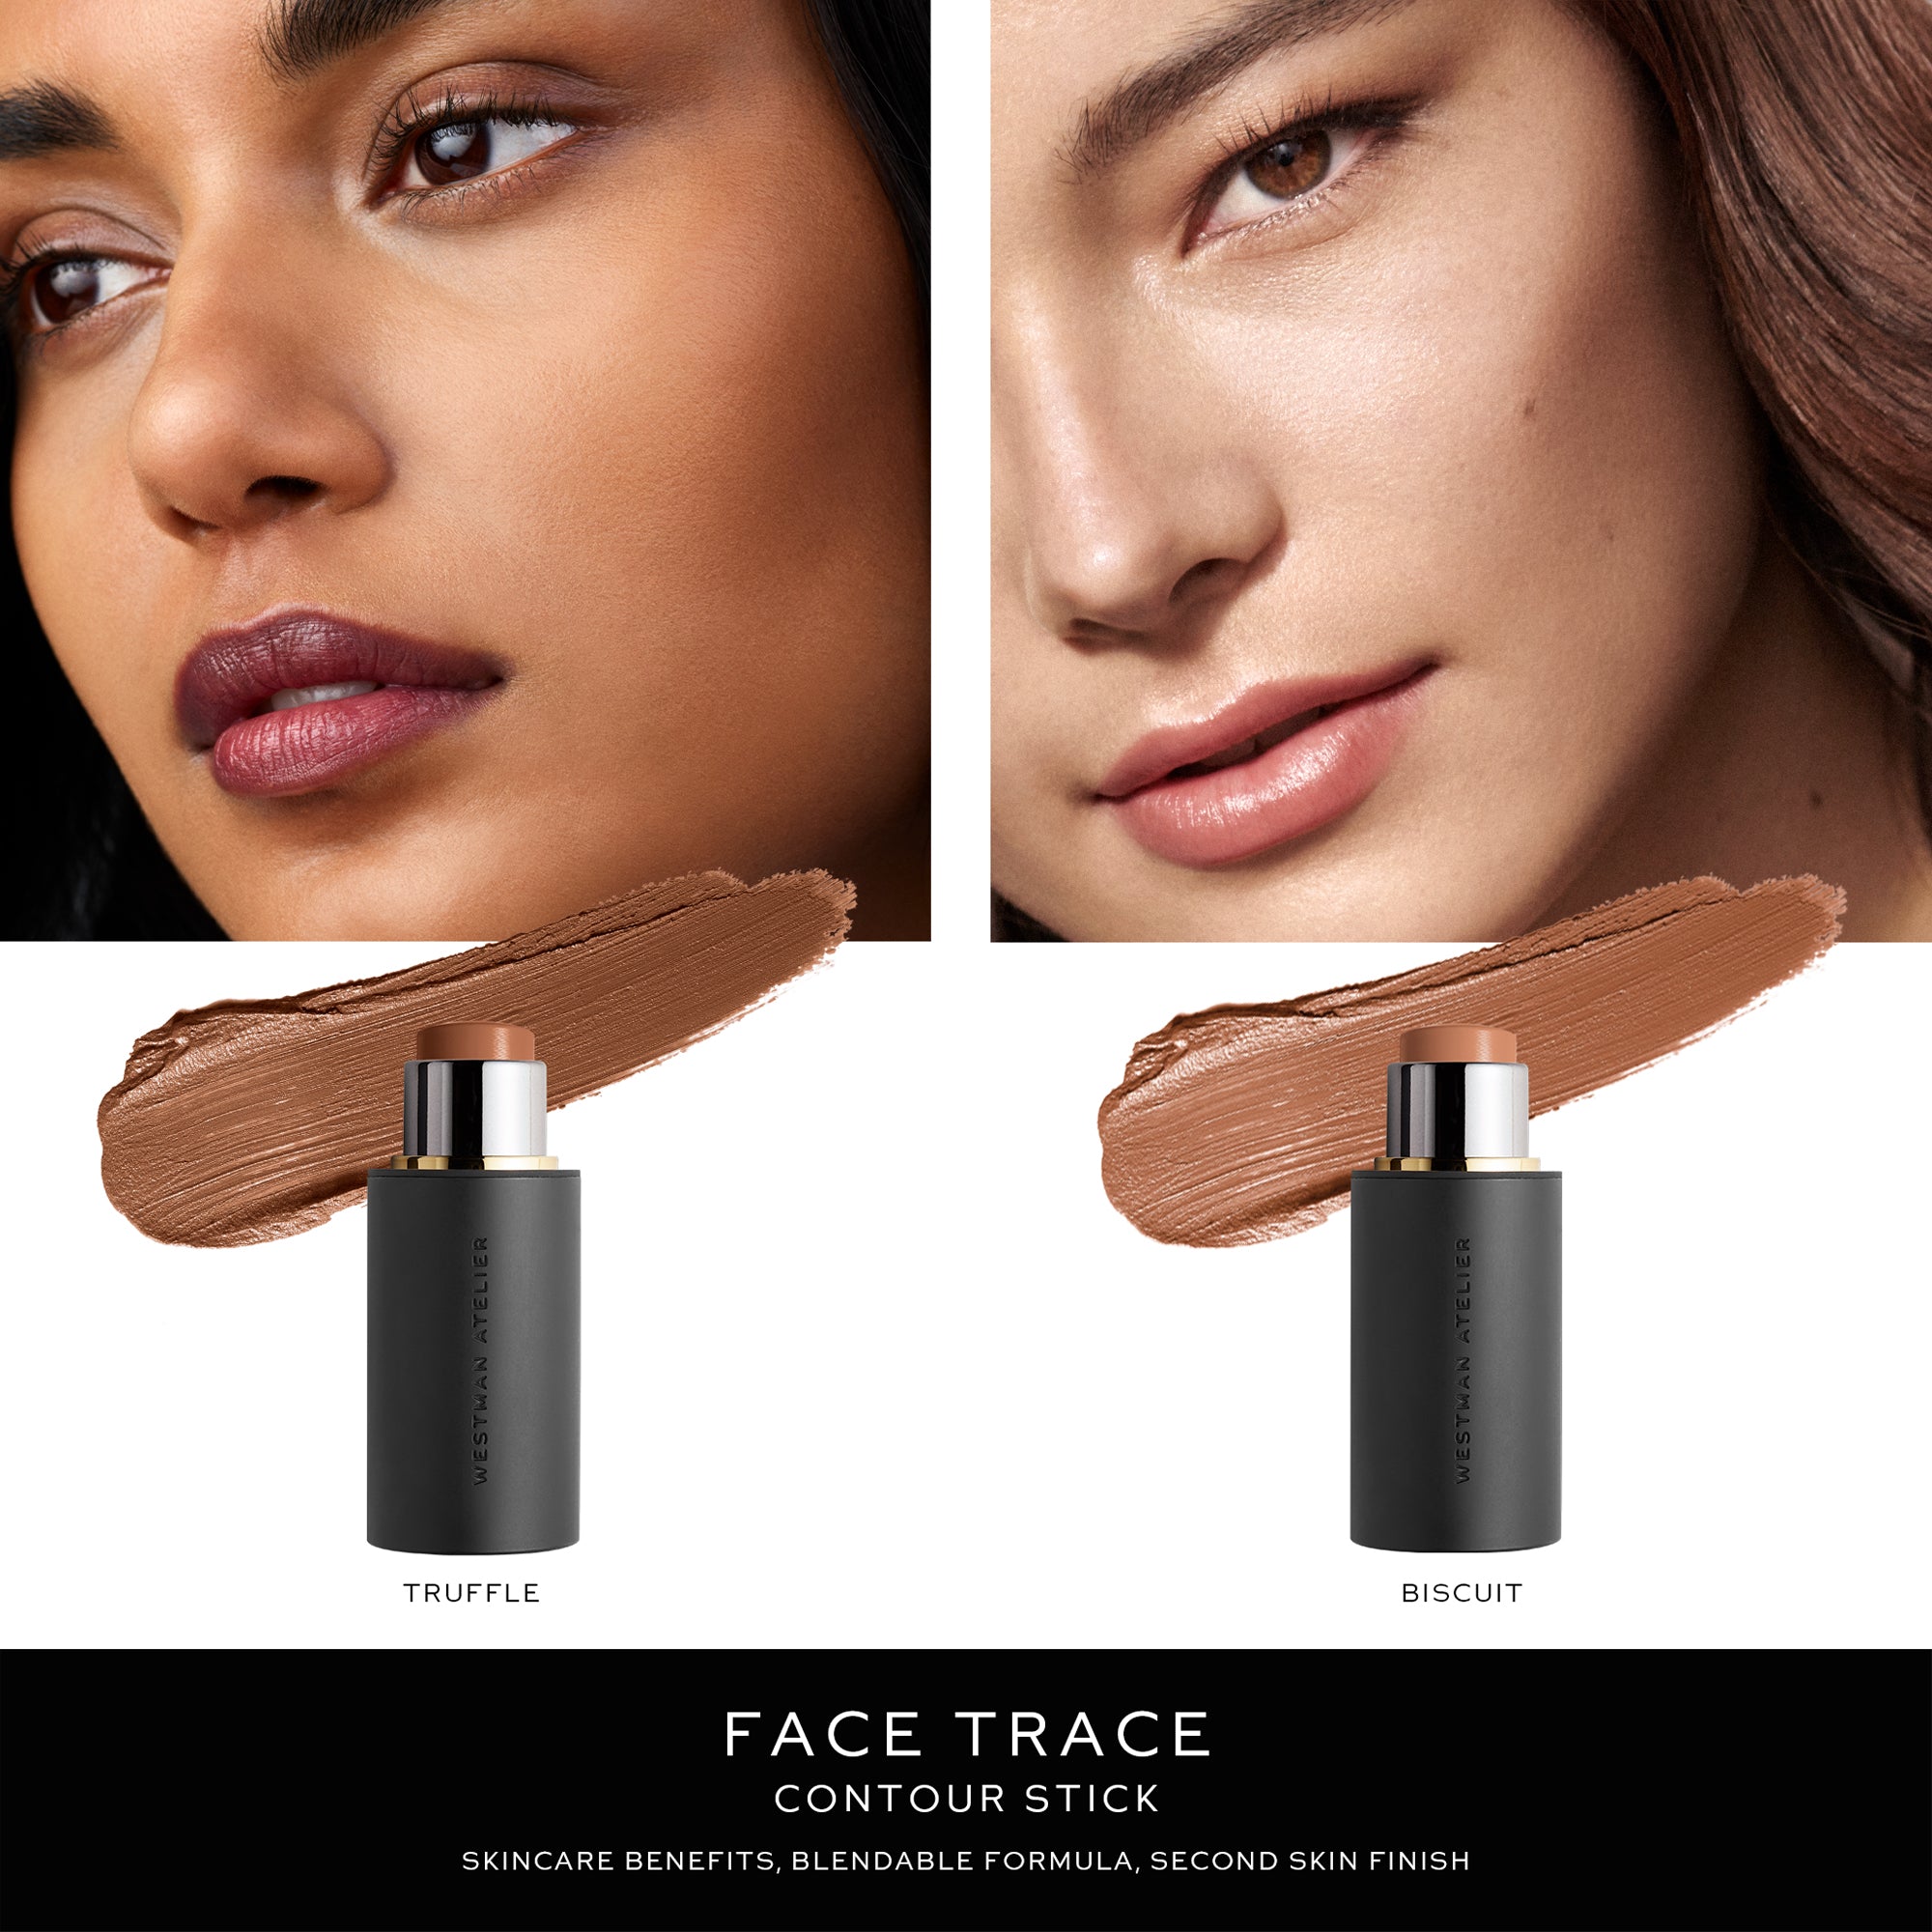 I TRIED EVERY SHADE! Westman Atelier Face Trace Cream Contour